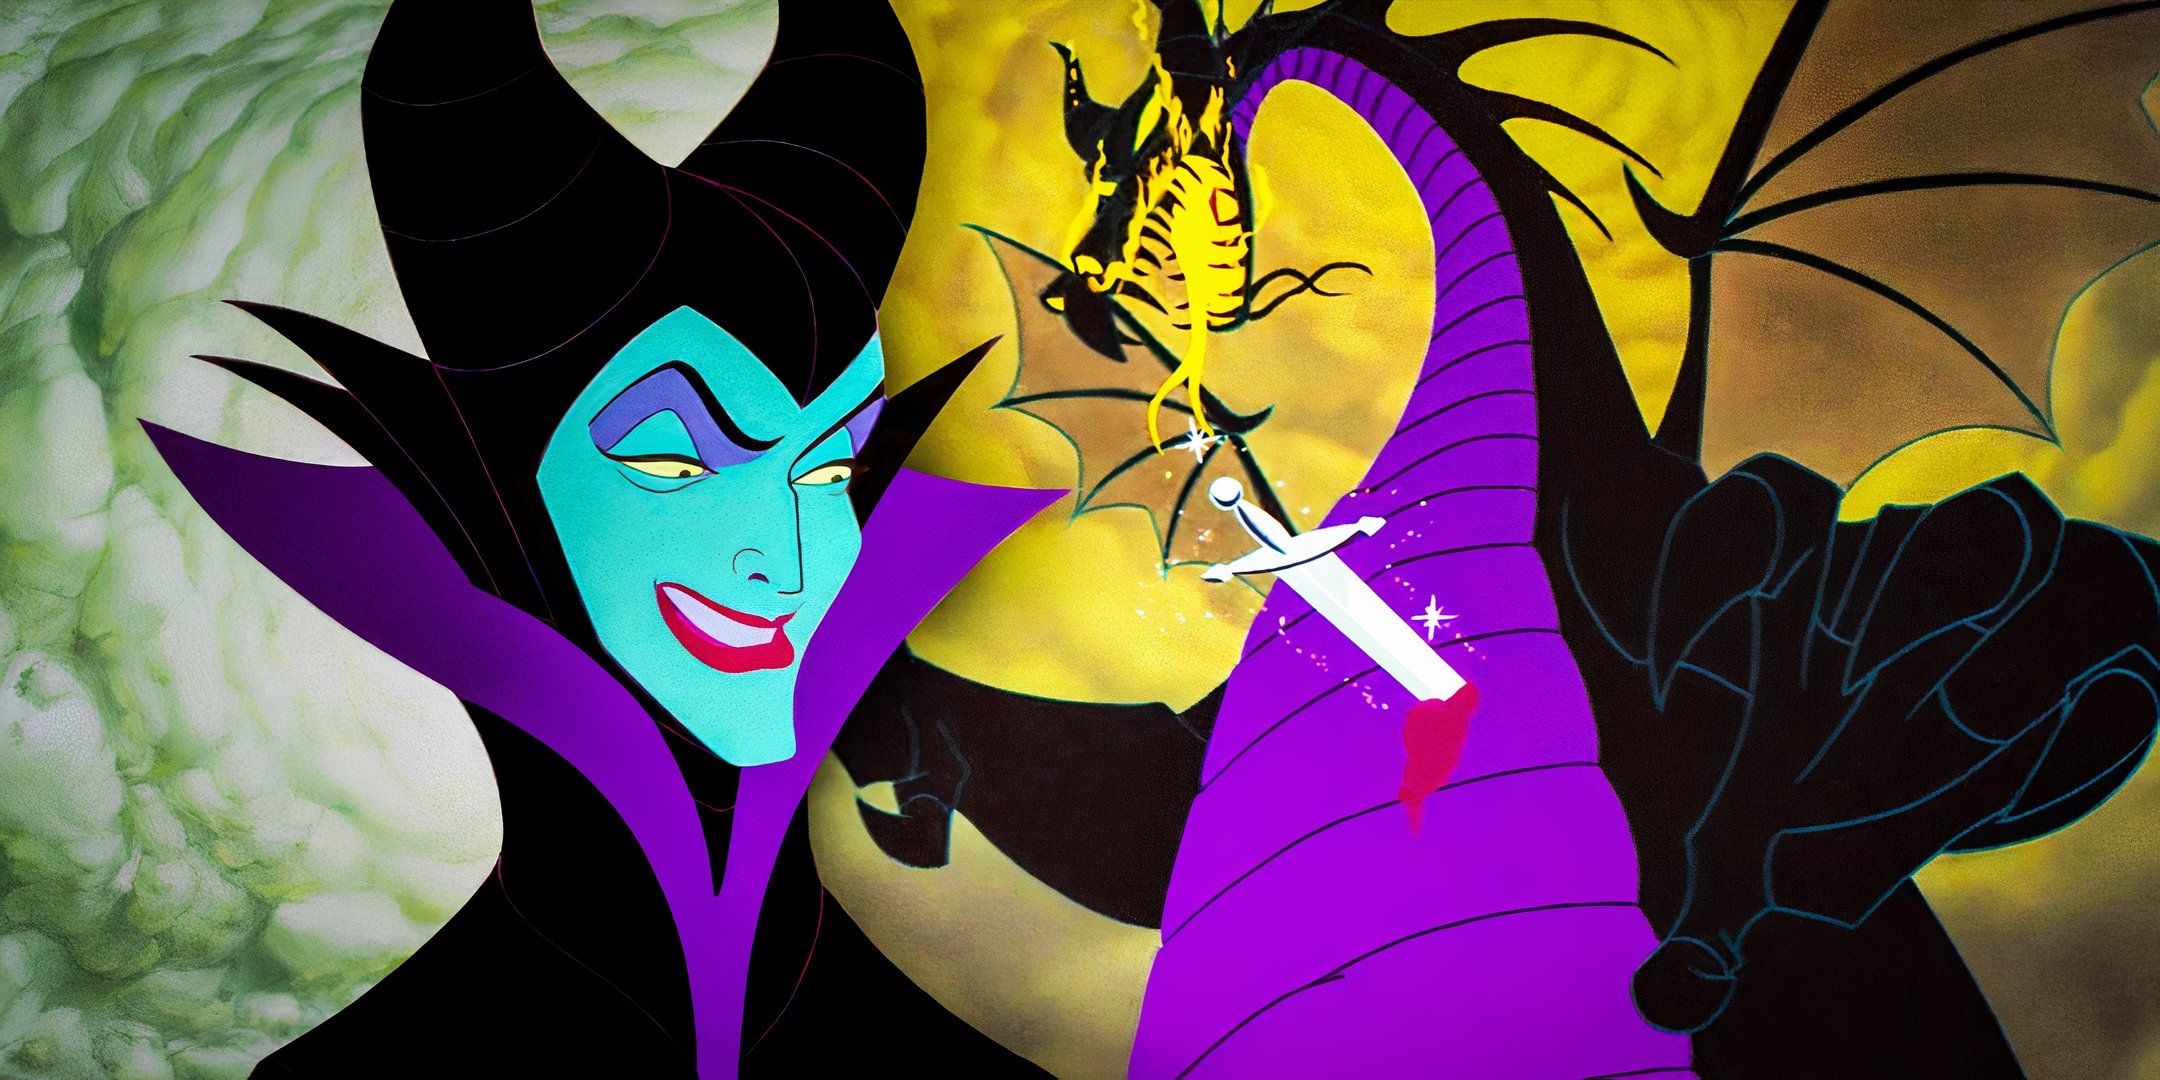 Maleficent in the animated film Sleeping Beauty and as a dragon